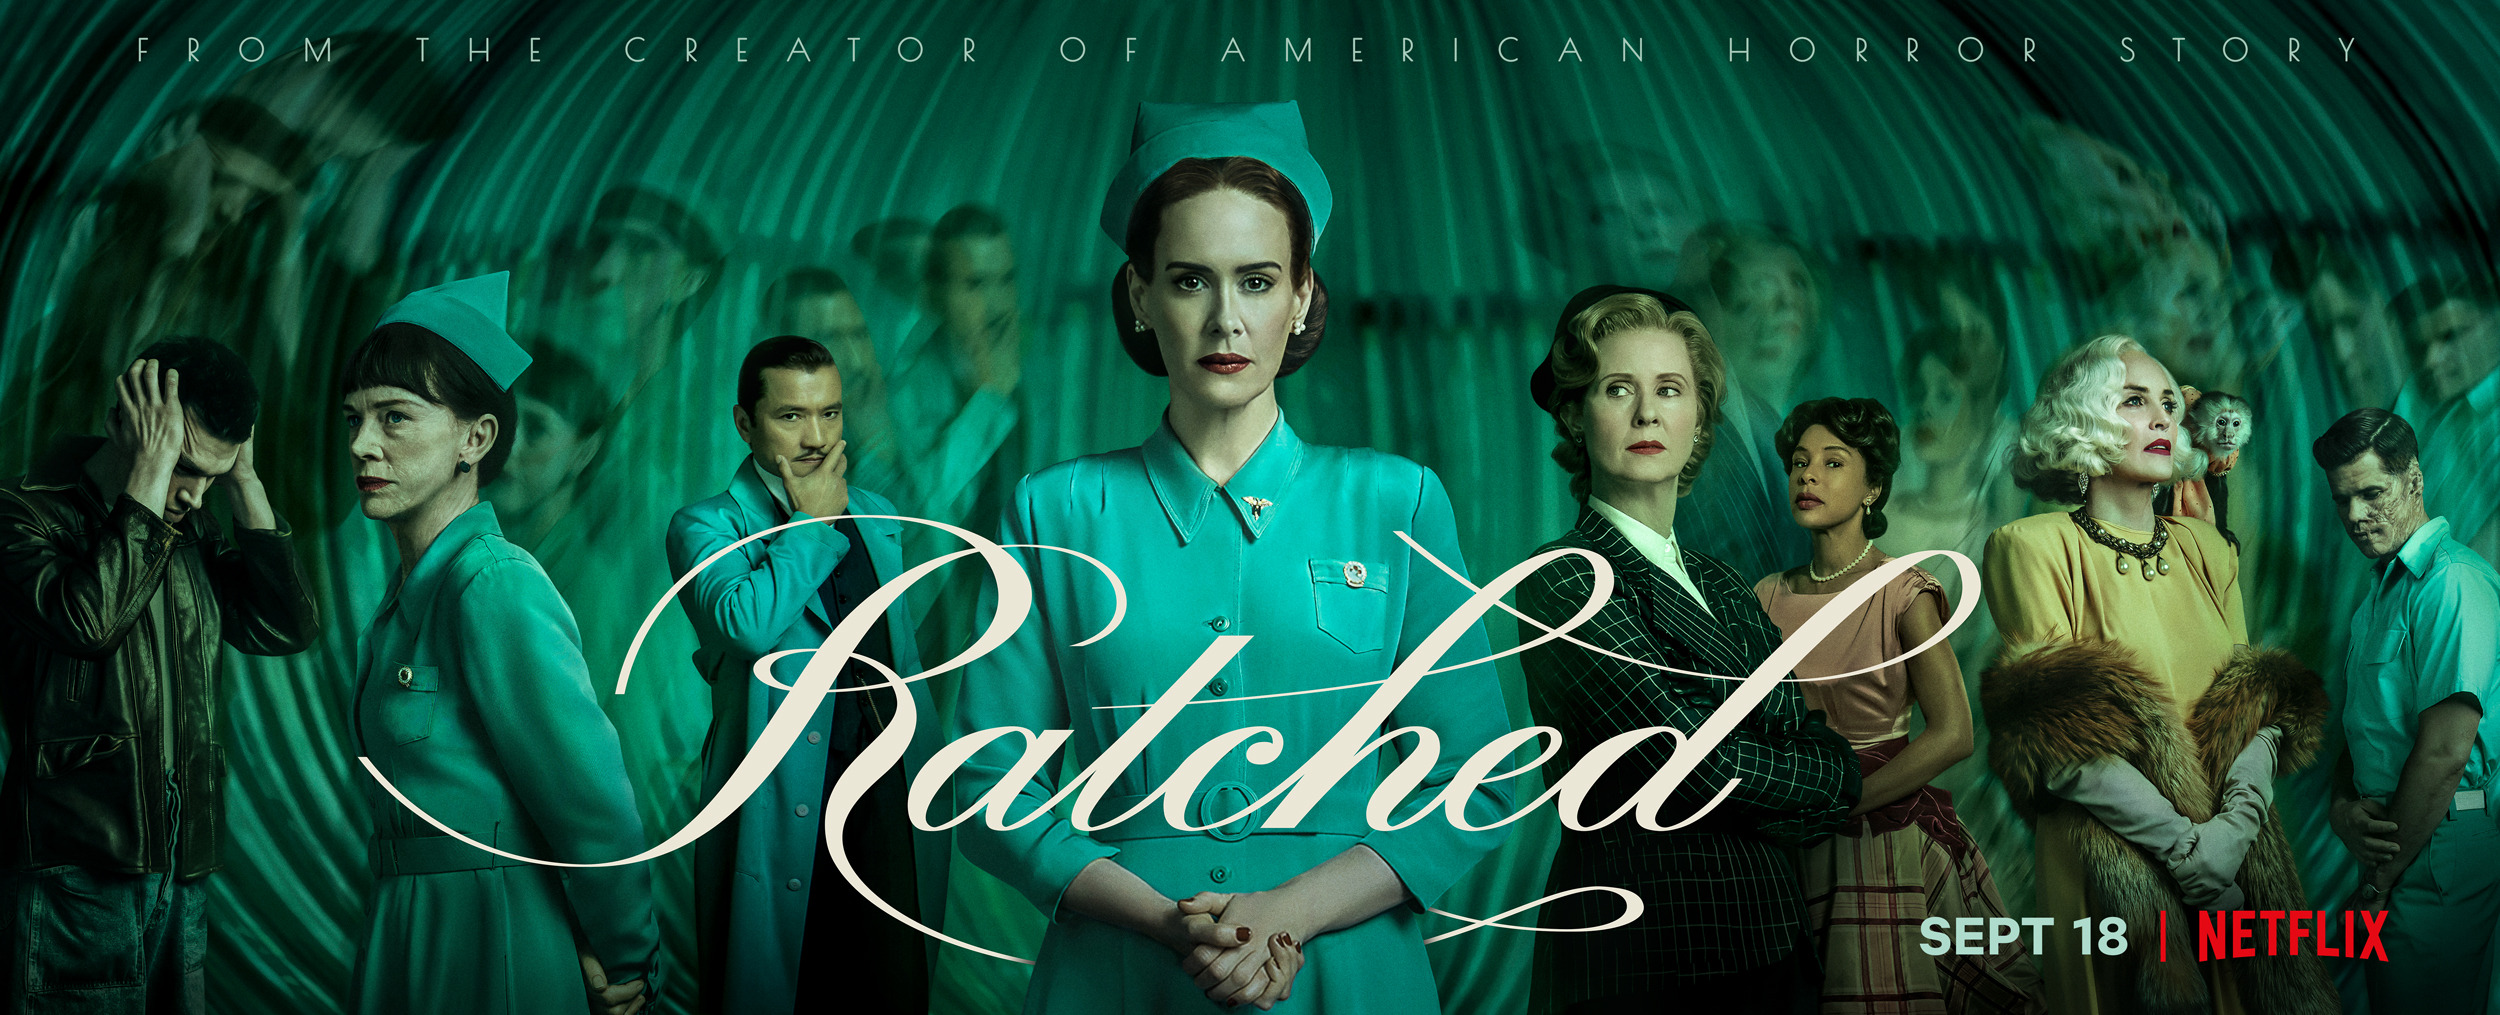 Mega Sized TV Poster Image for Ratched (#6 of 7)